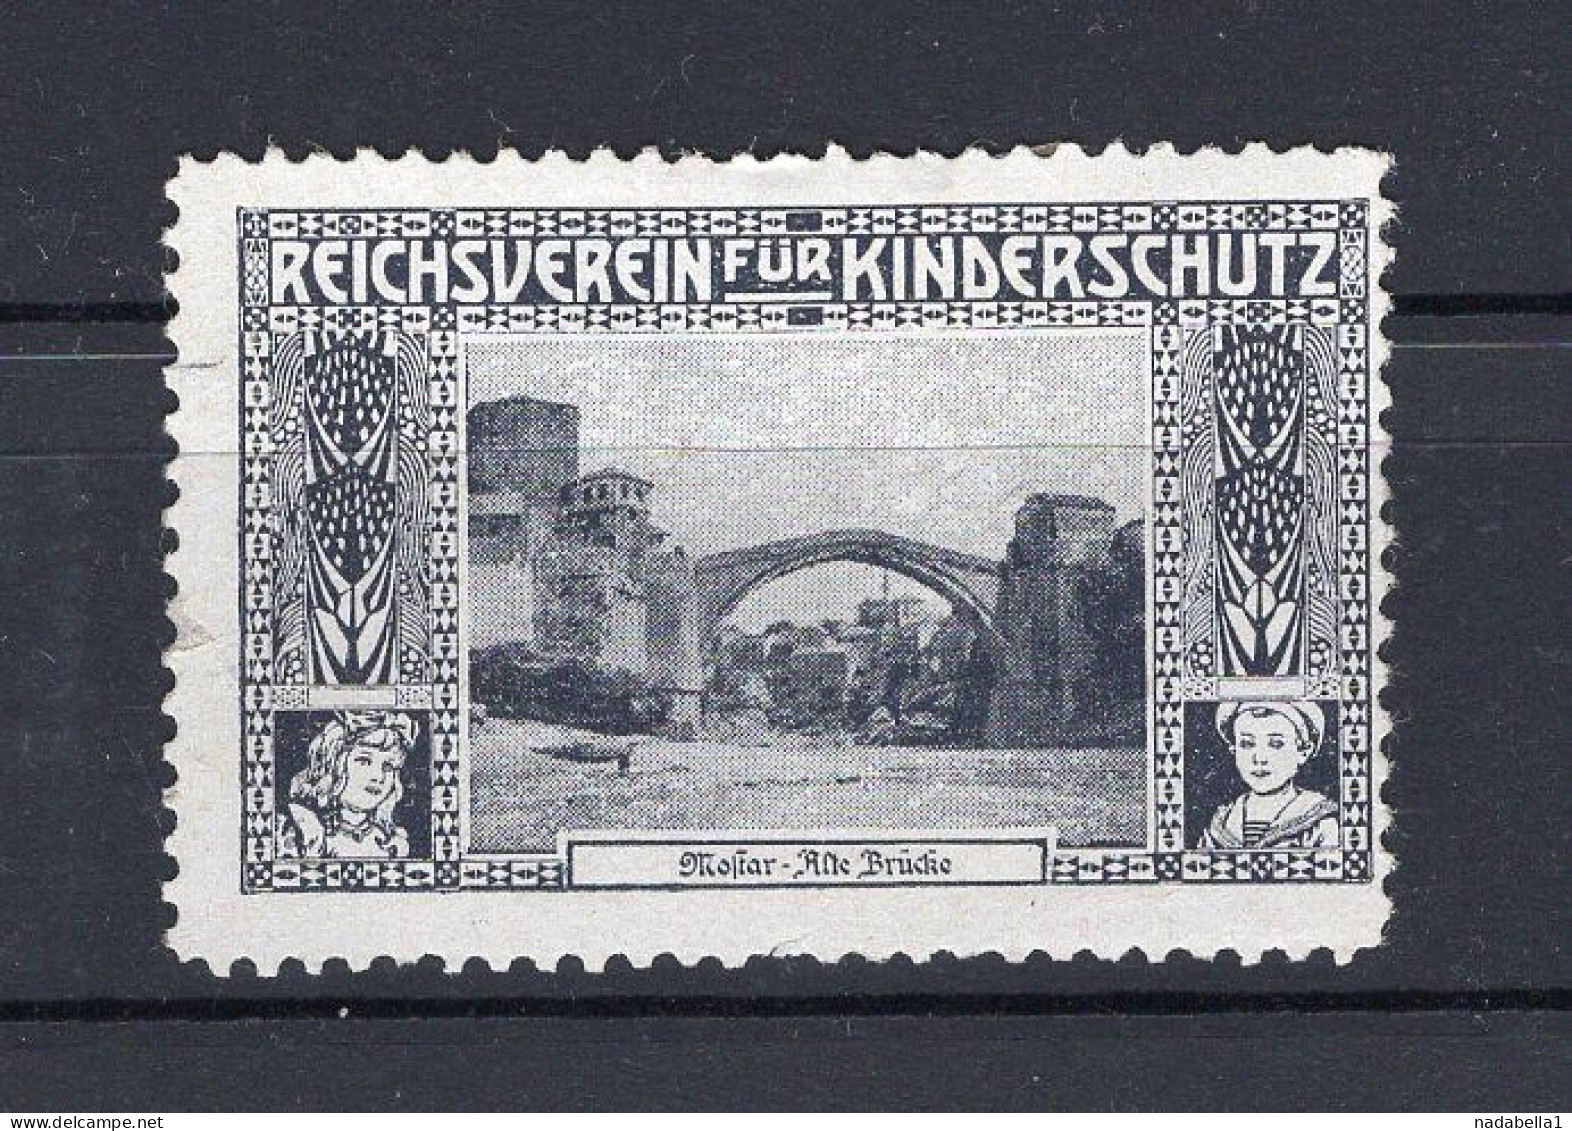 1900? AUSTRIA,HUNGARY EMPIRE,BOSNIA,REICH ASSOCIATION FOR CHILD PROTECTION ADDITIONAL STAMP,MOSTAR OLD BRIDGE - Nuevos